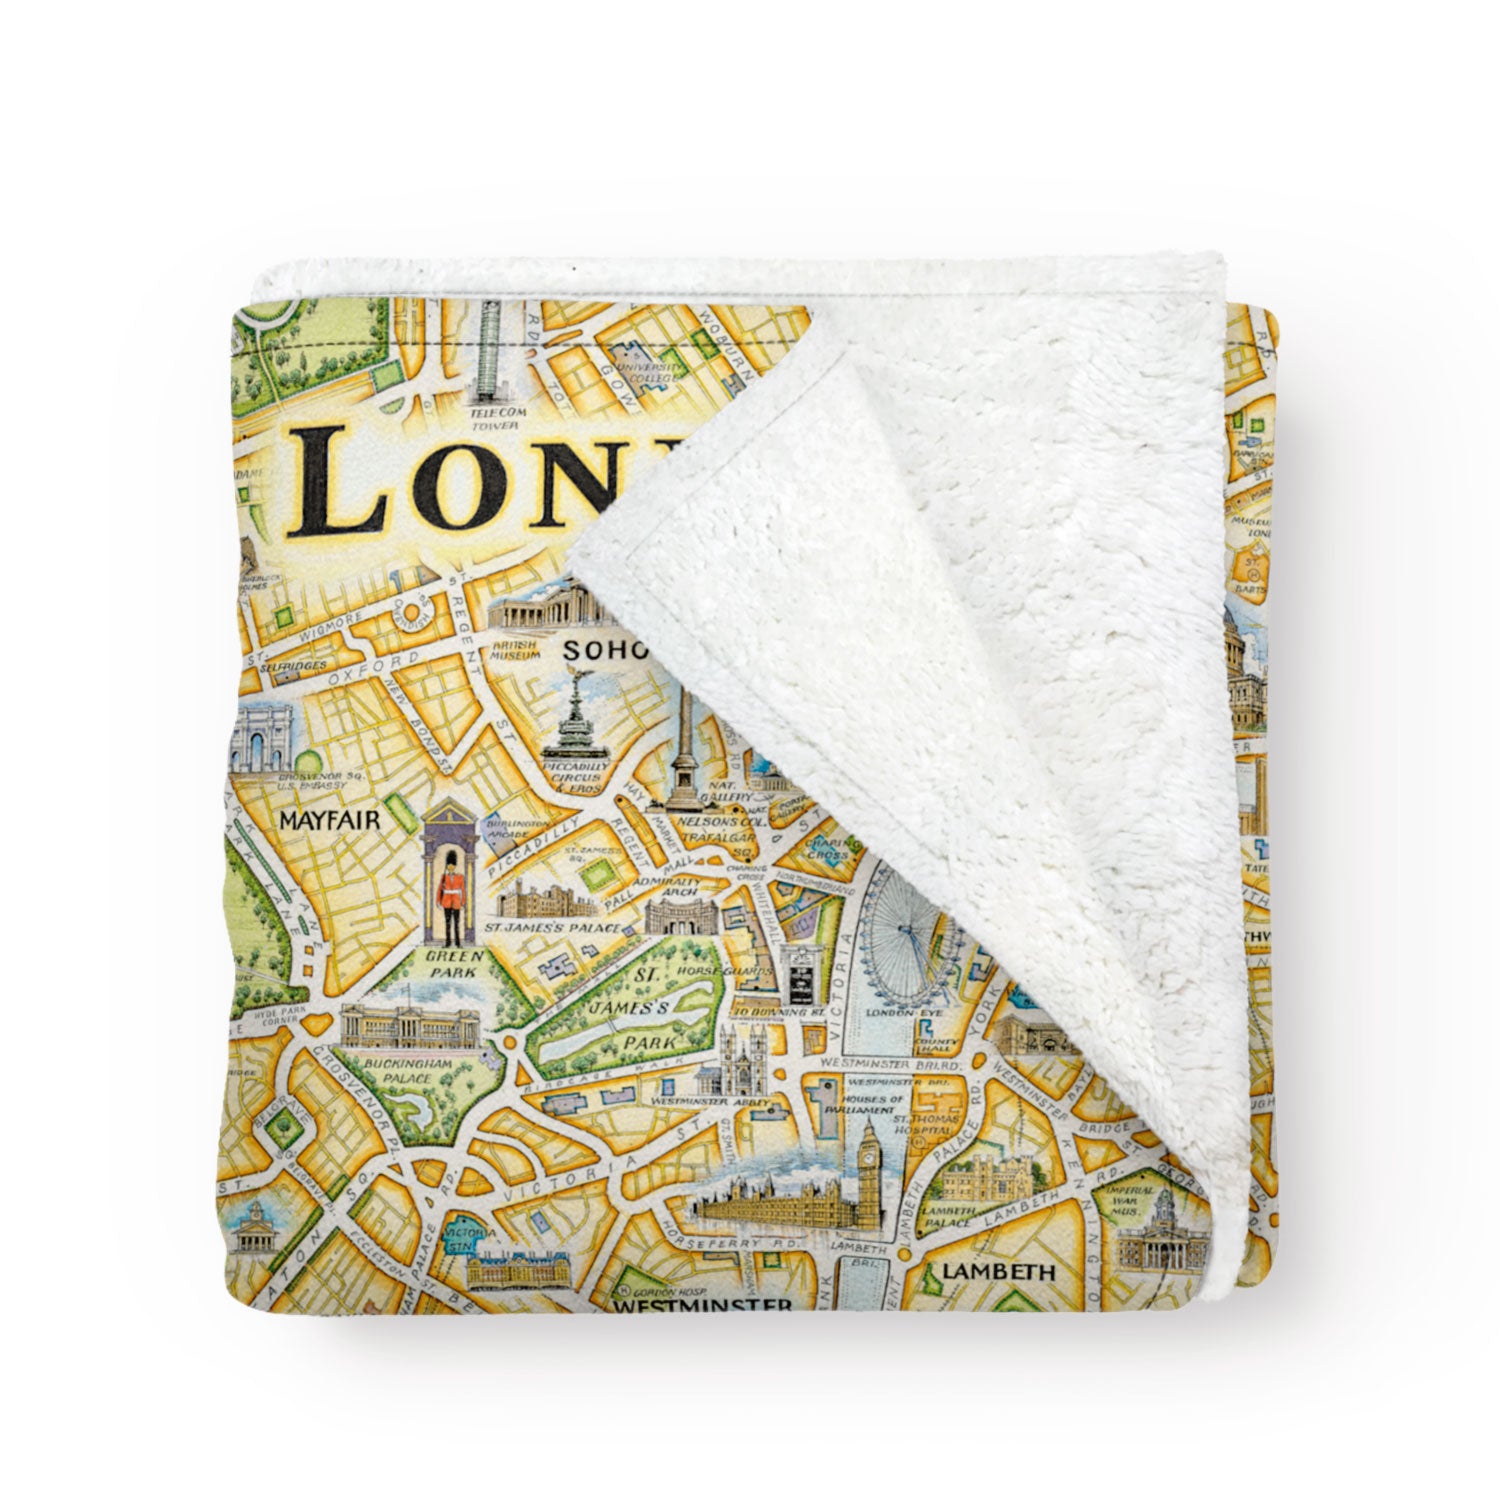 Folded blanket with a map of London on it. The blanket is a soft and cozy fleece. Full-detail map. Measures 58